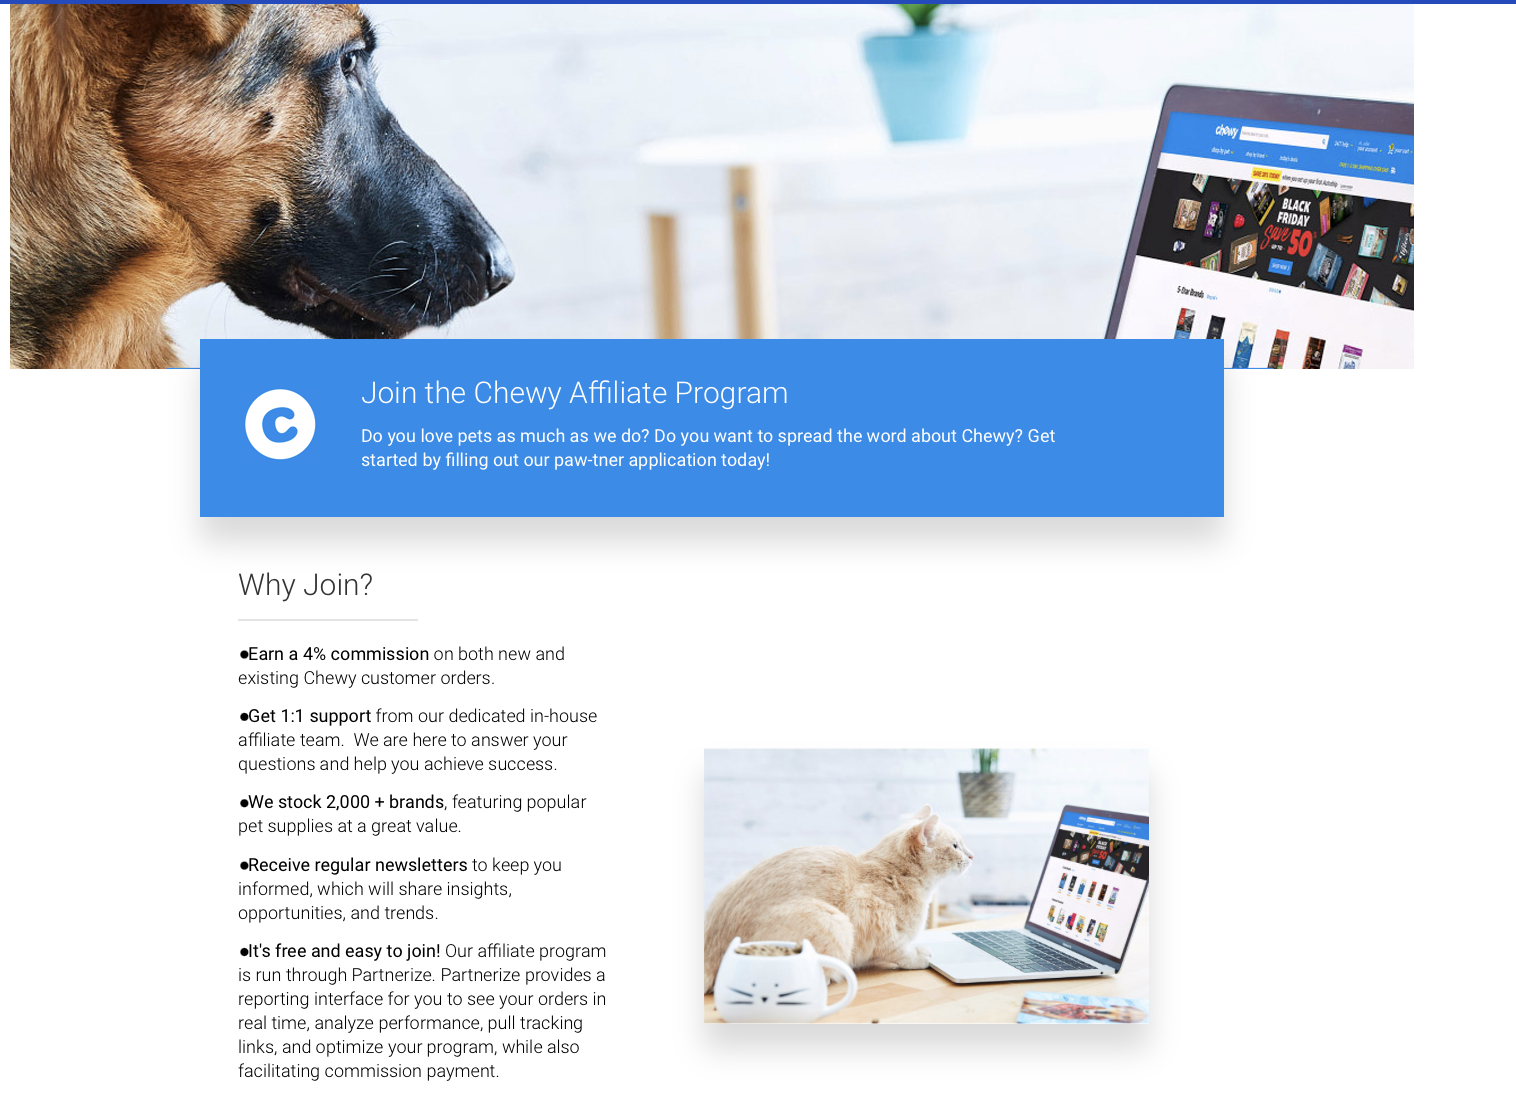 Pet affiliate program landing page for the Chewy brand.